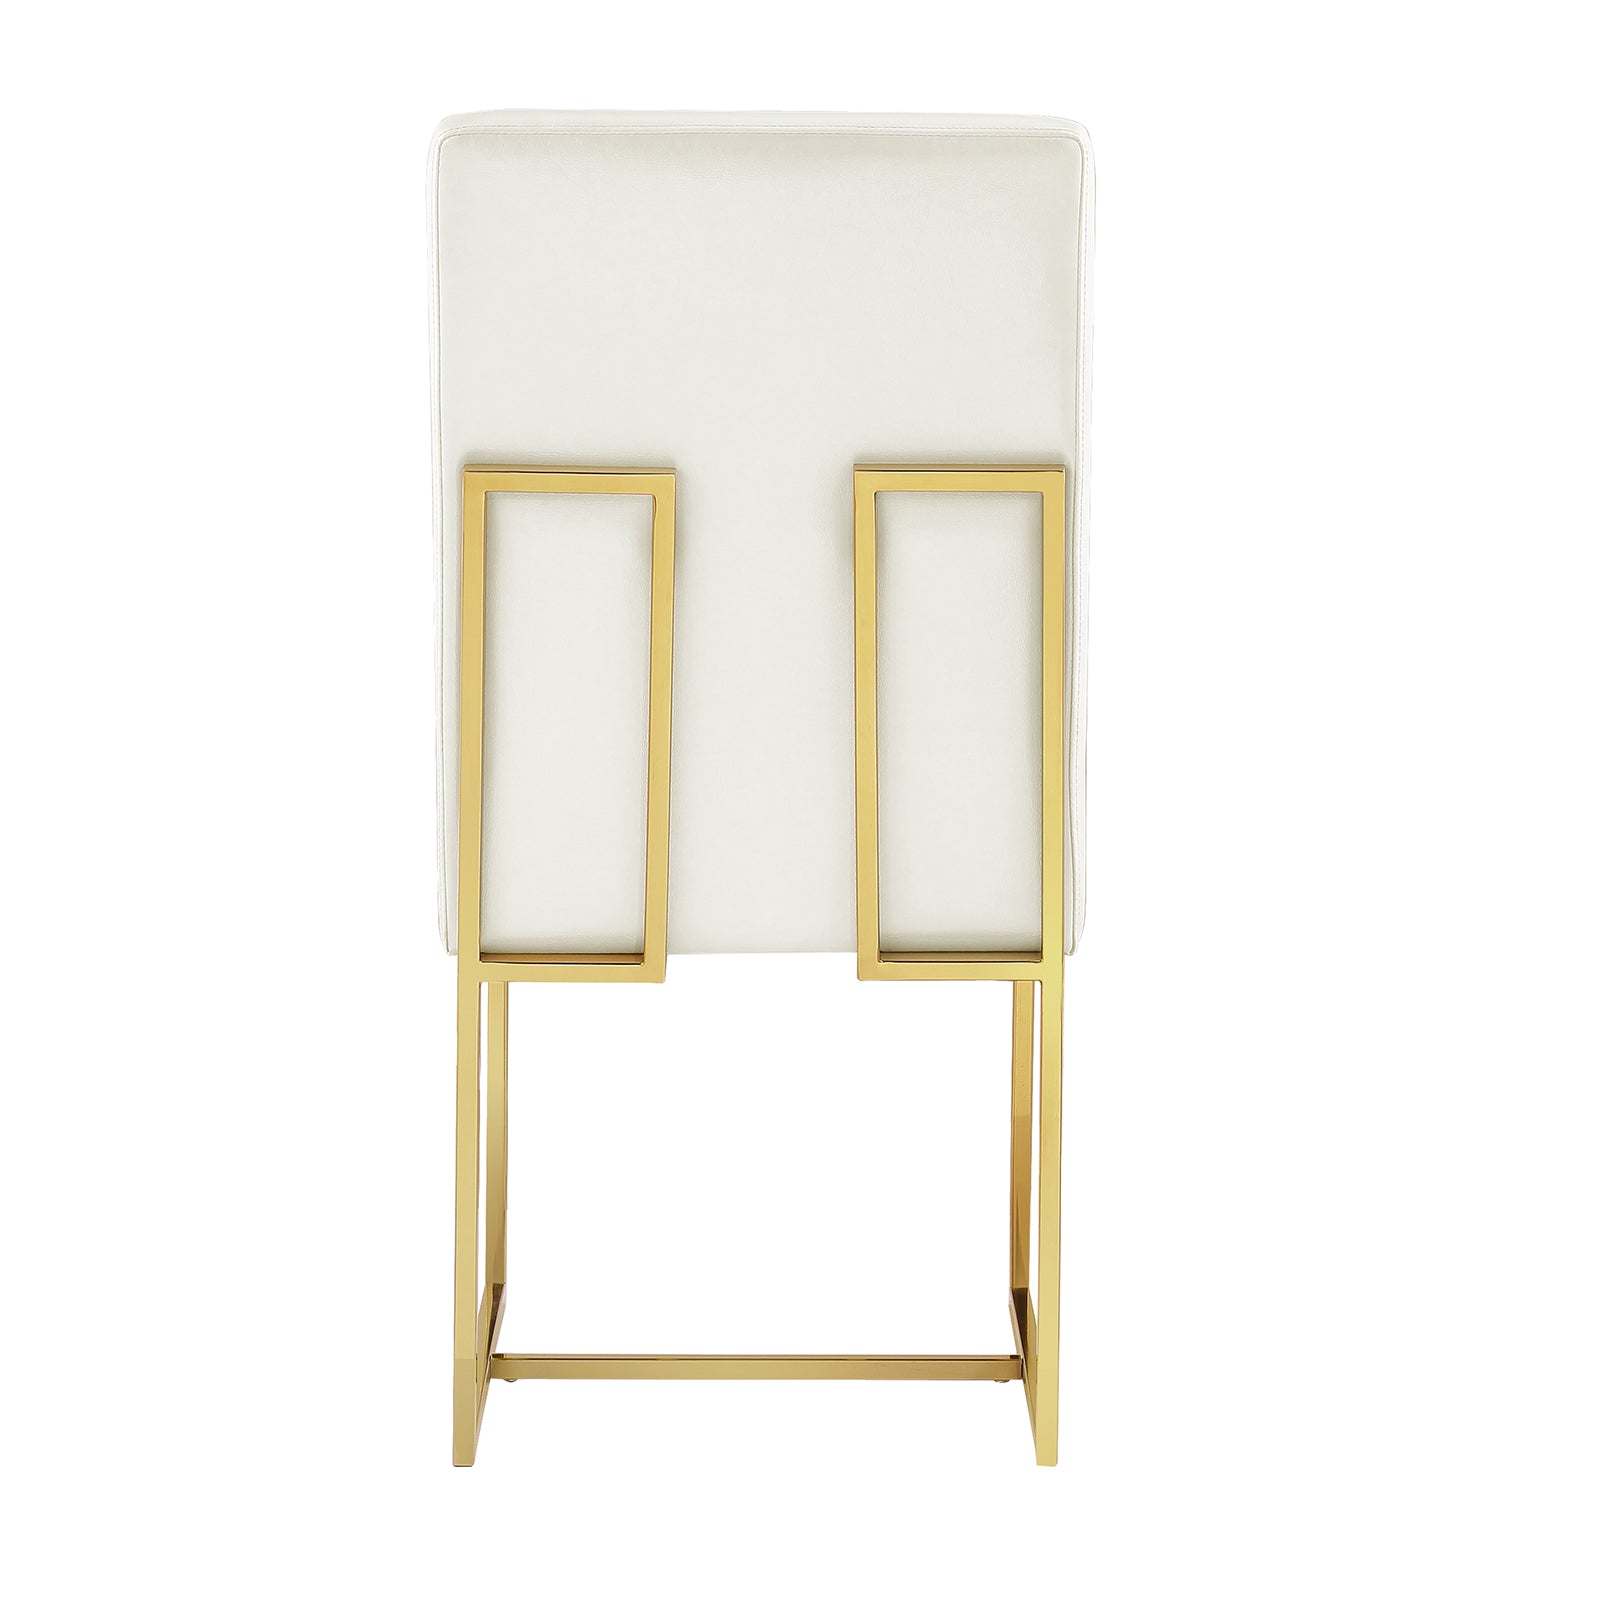 713 Set | AUZ White and Gold Dining room Sets for 6